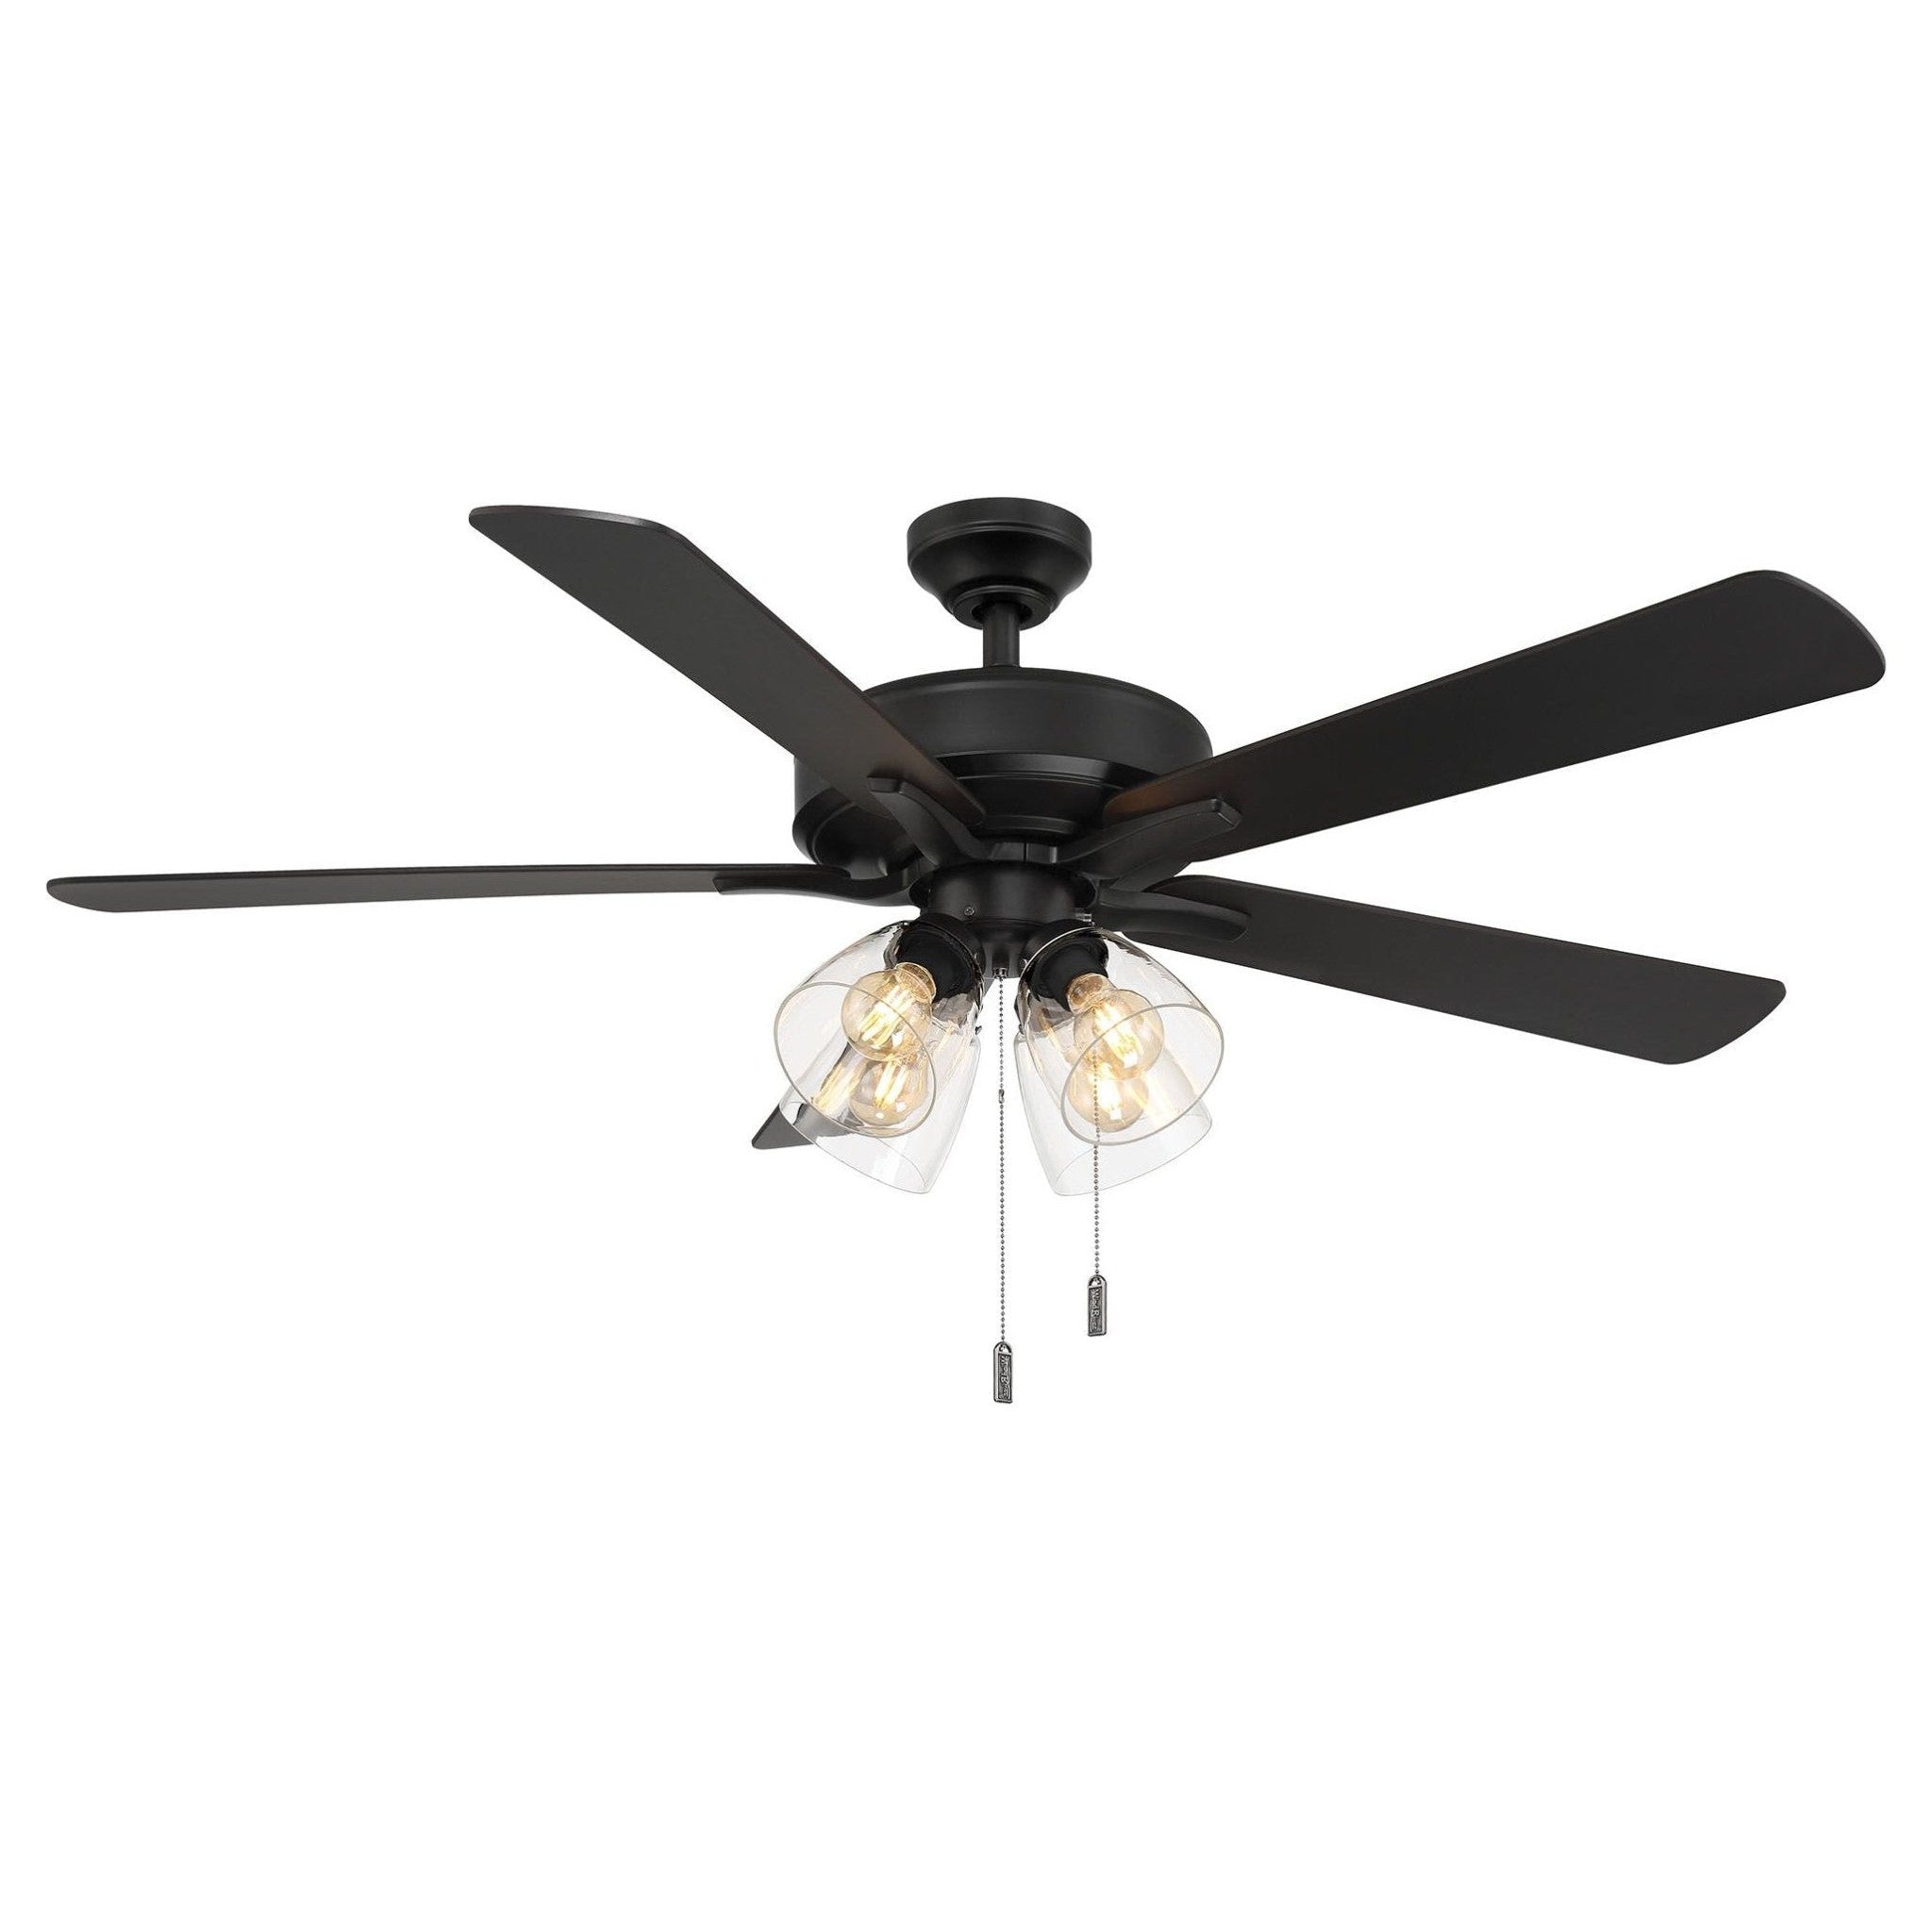 Wind River Pecos 52" 5 Blade Pull Chain LED Ceiling Fan - Image 1